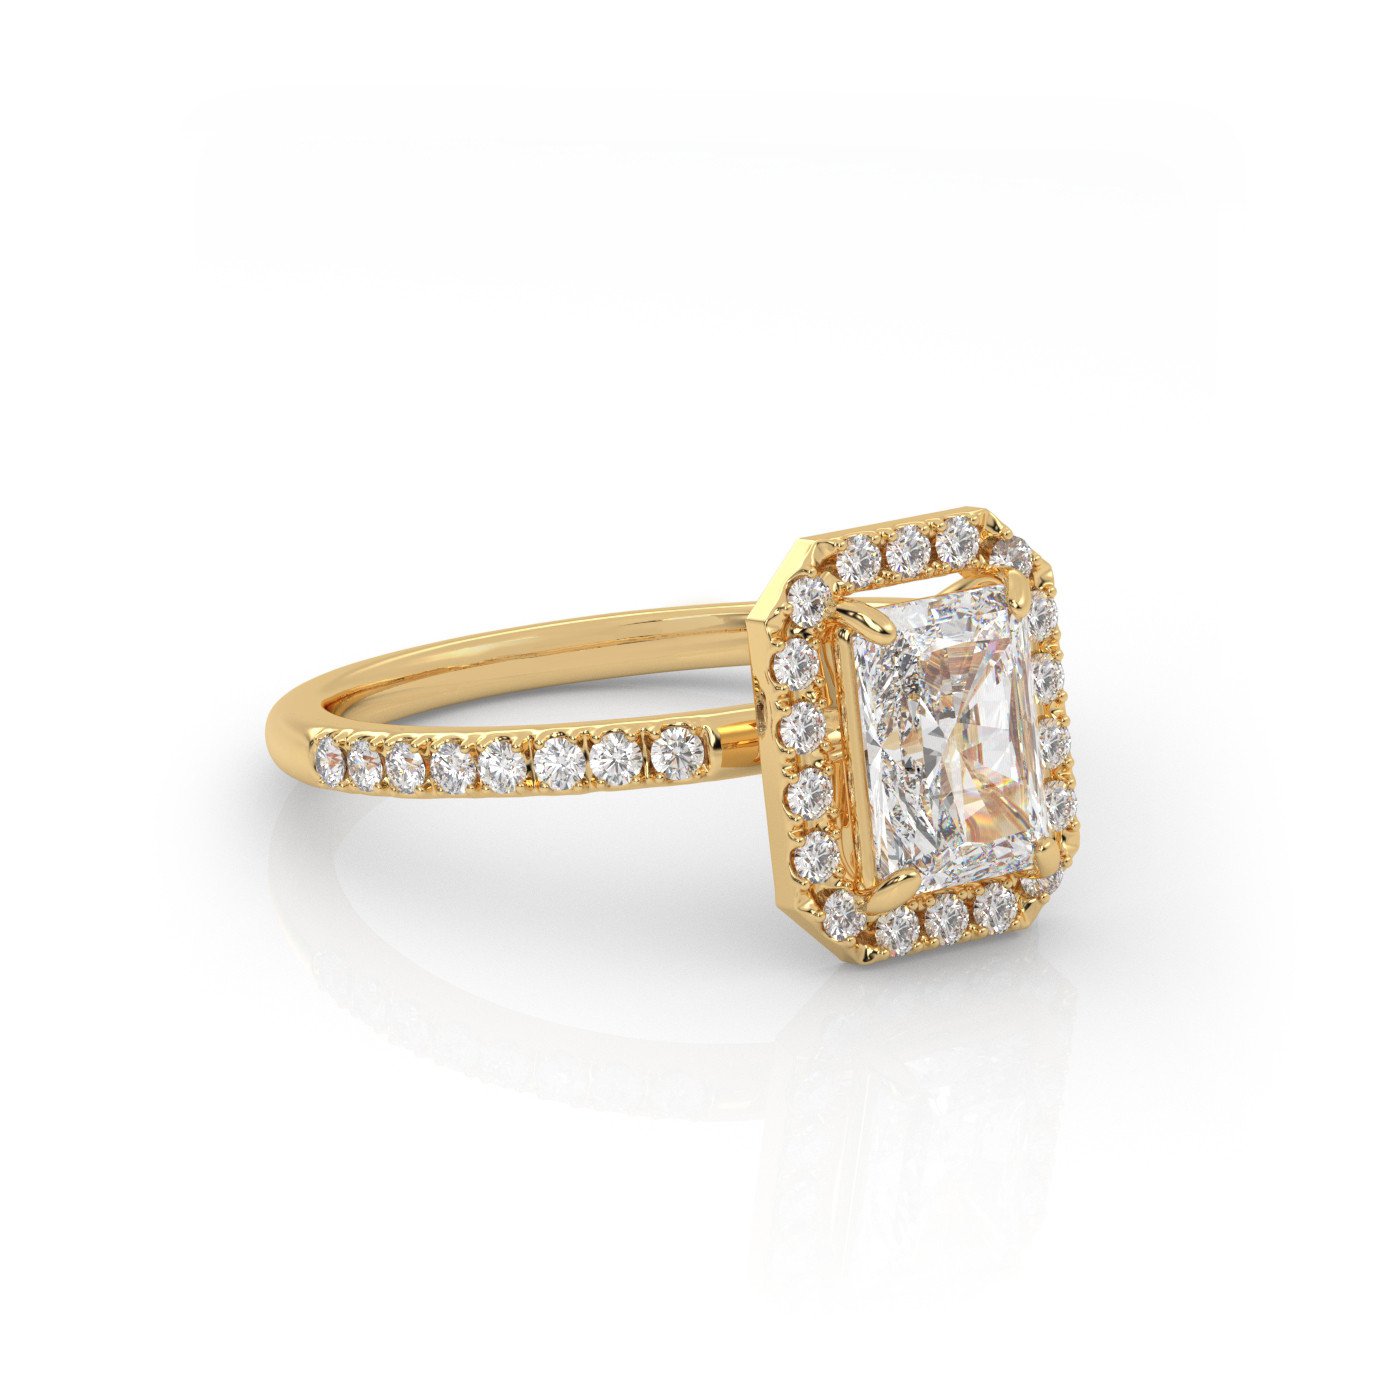 18K YELLOW GOLD Radiant Cut Diamond engagement Ring with Halo and Pave style